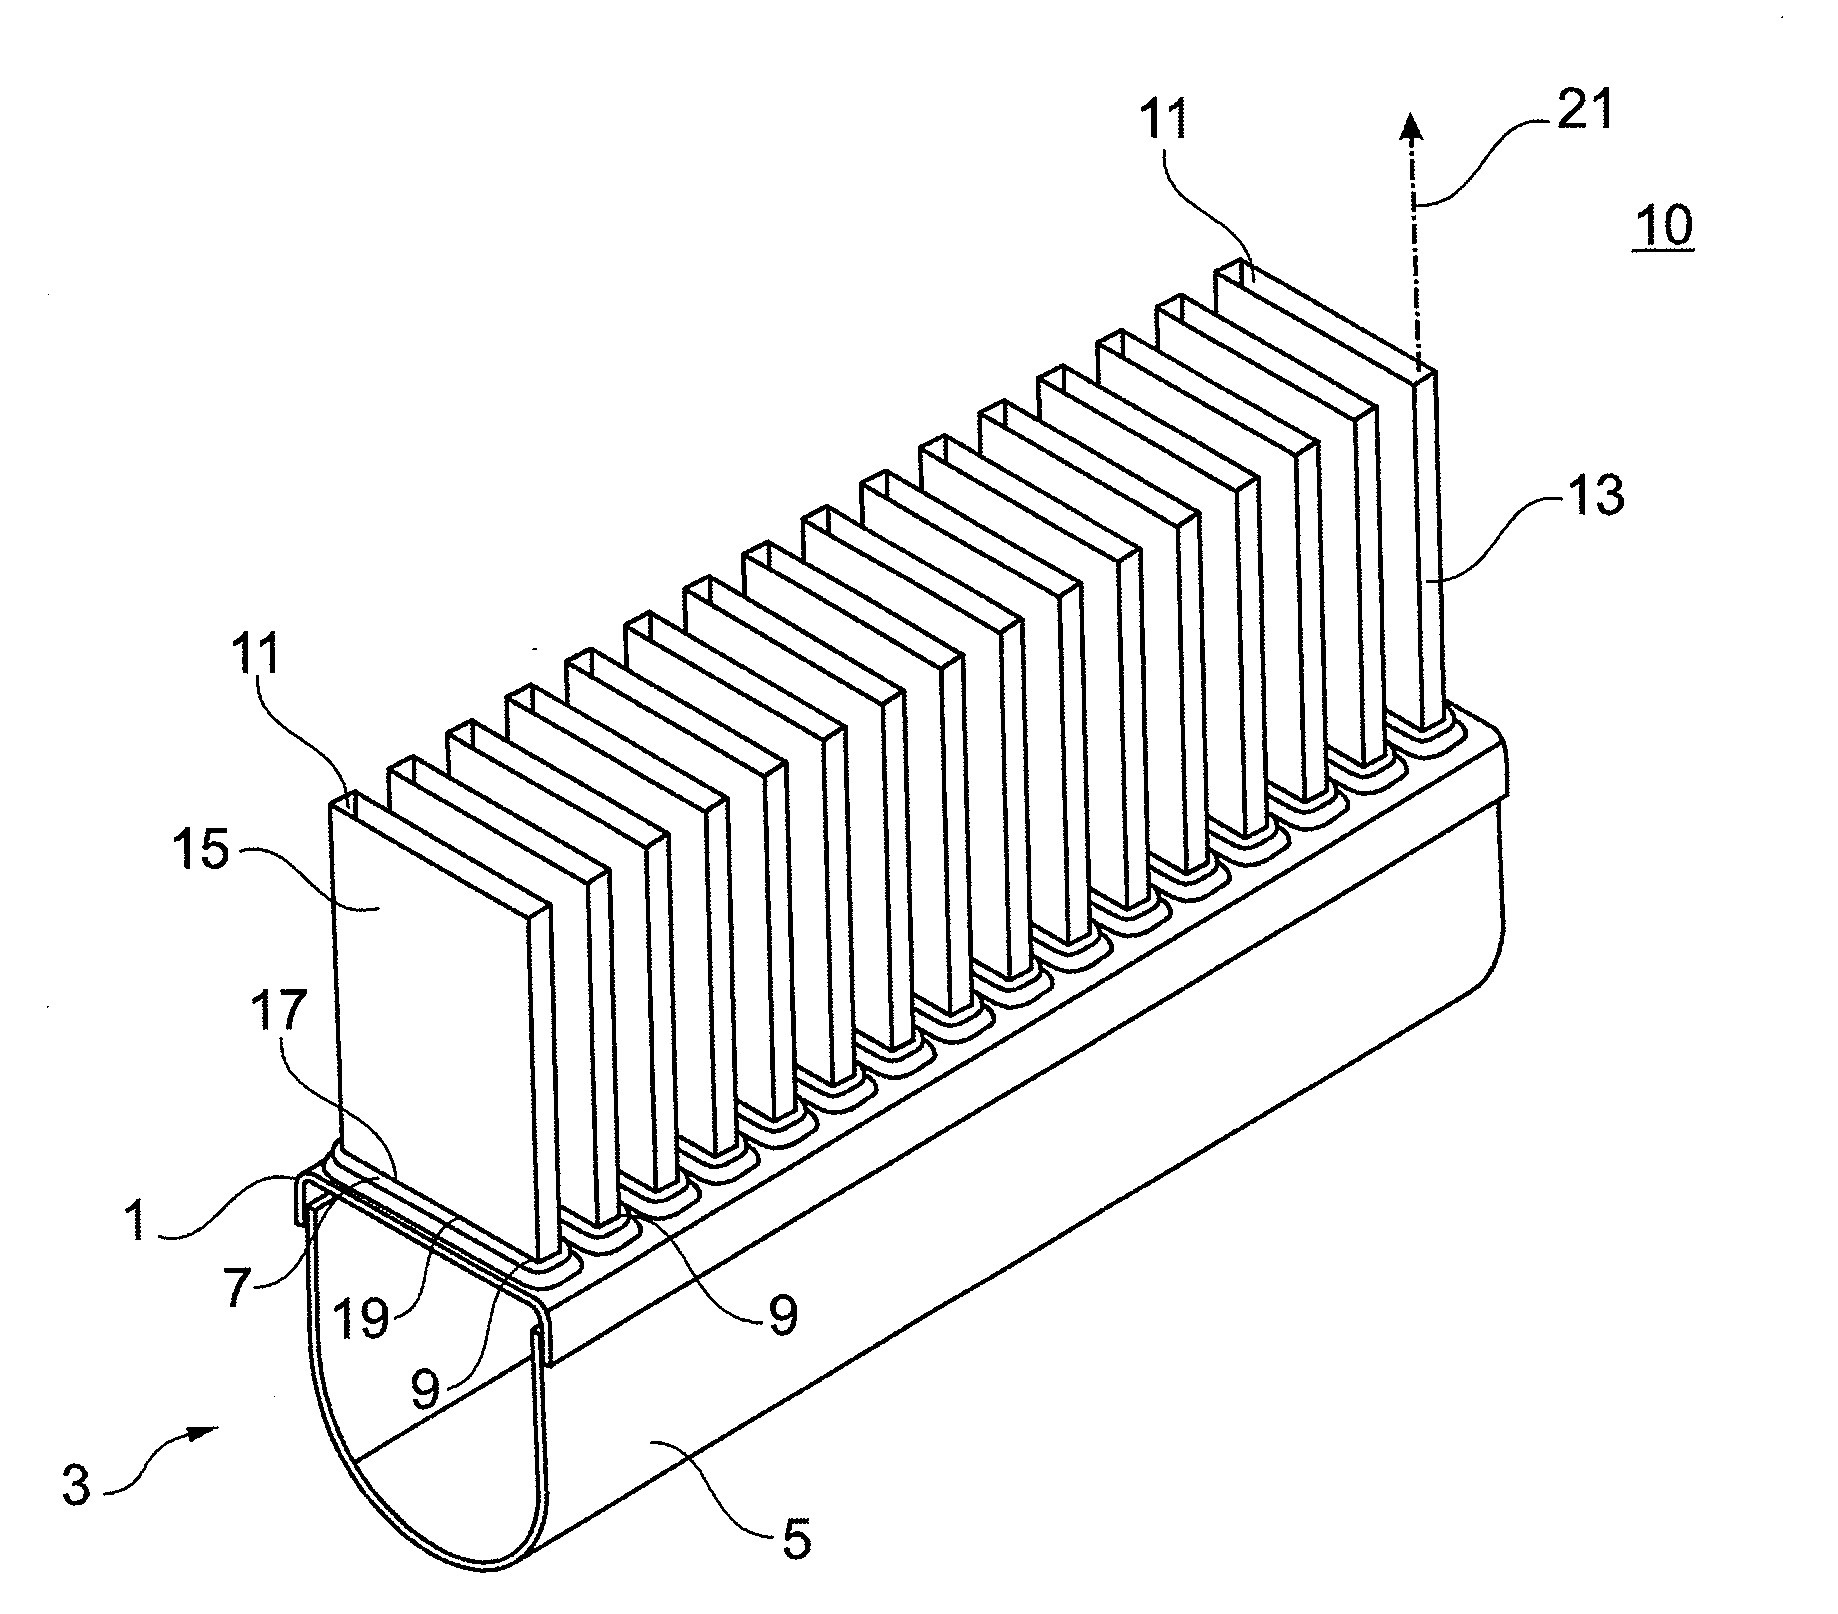 Heat exchanger, use, and manufacturing process for a heat exchanger